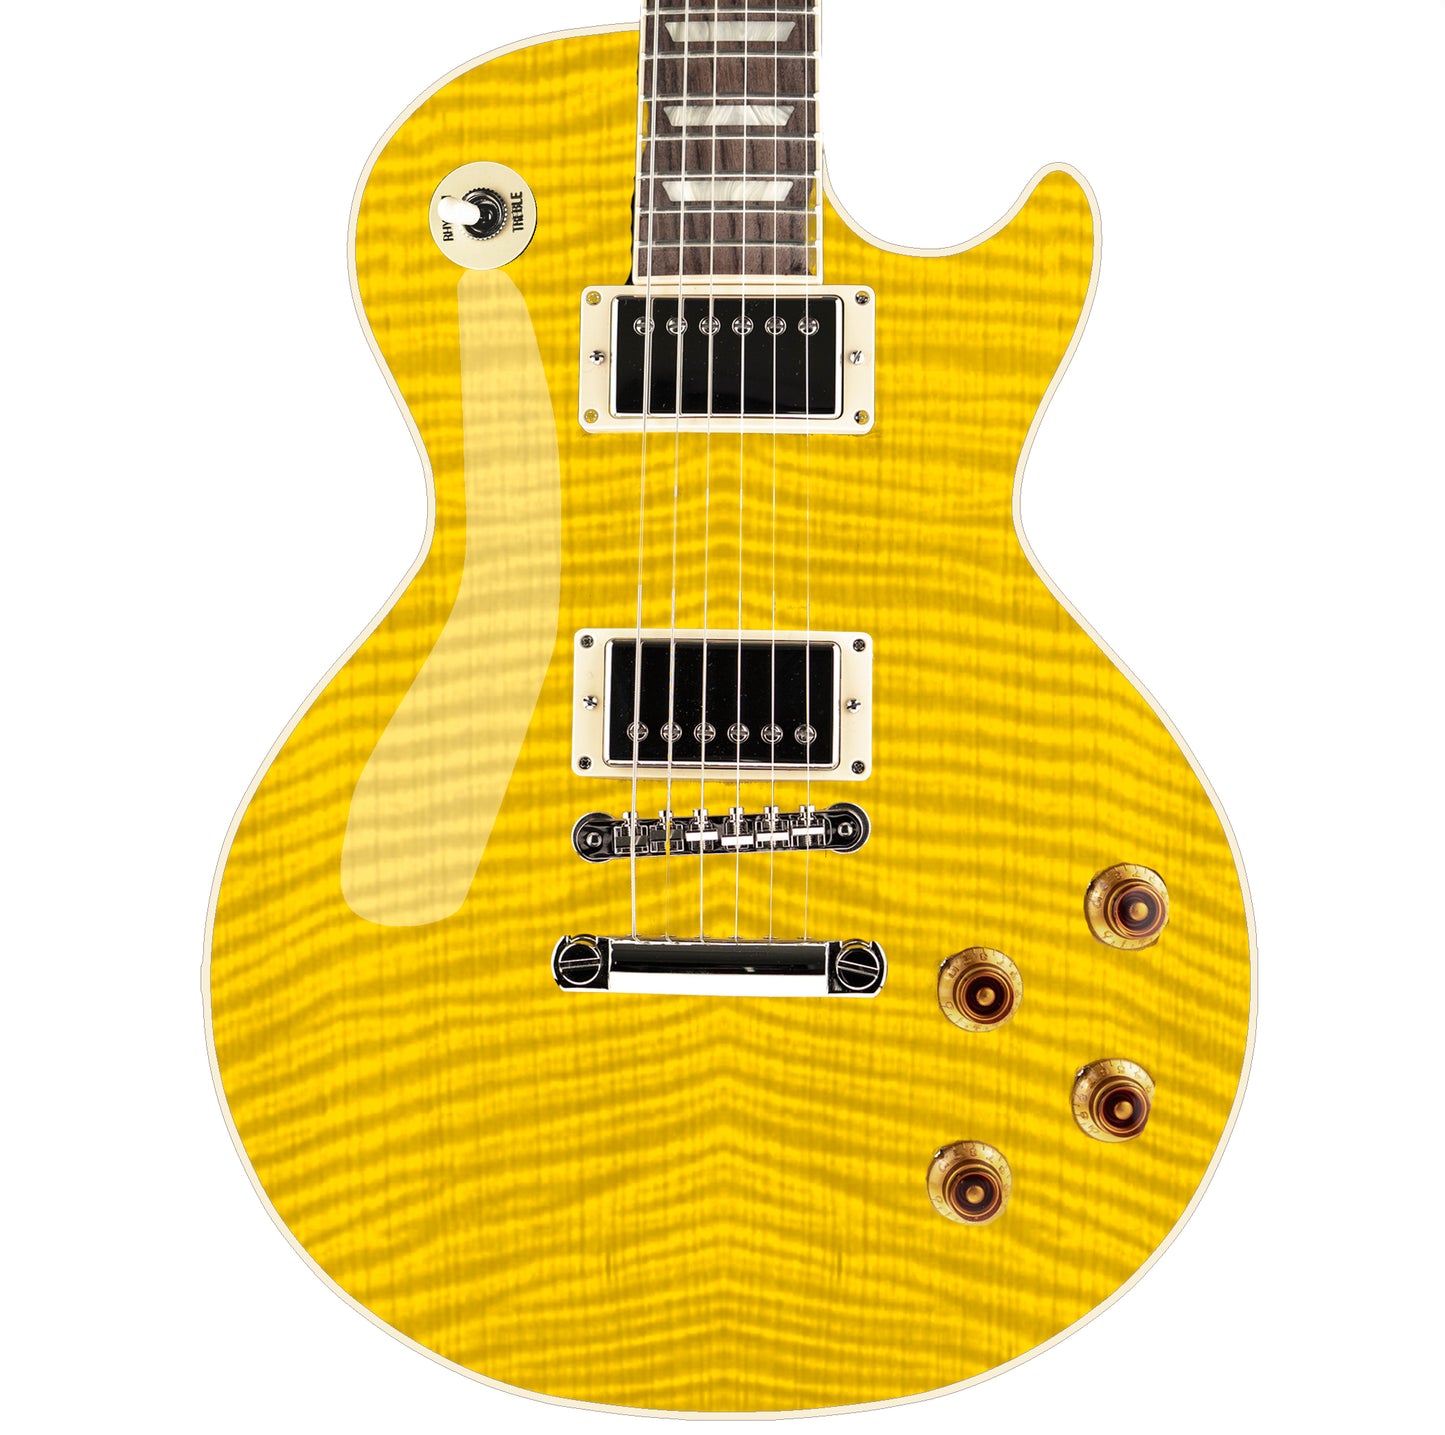 Guitar Skin Wrap Laminated Vinyl Decal Sticker The Amber Flamed Maple GS60